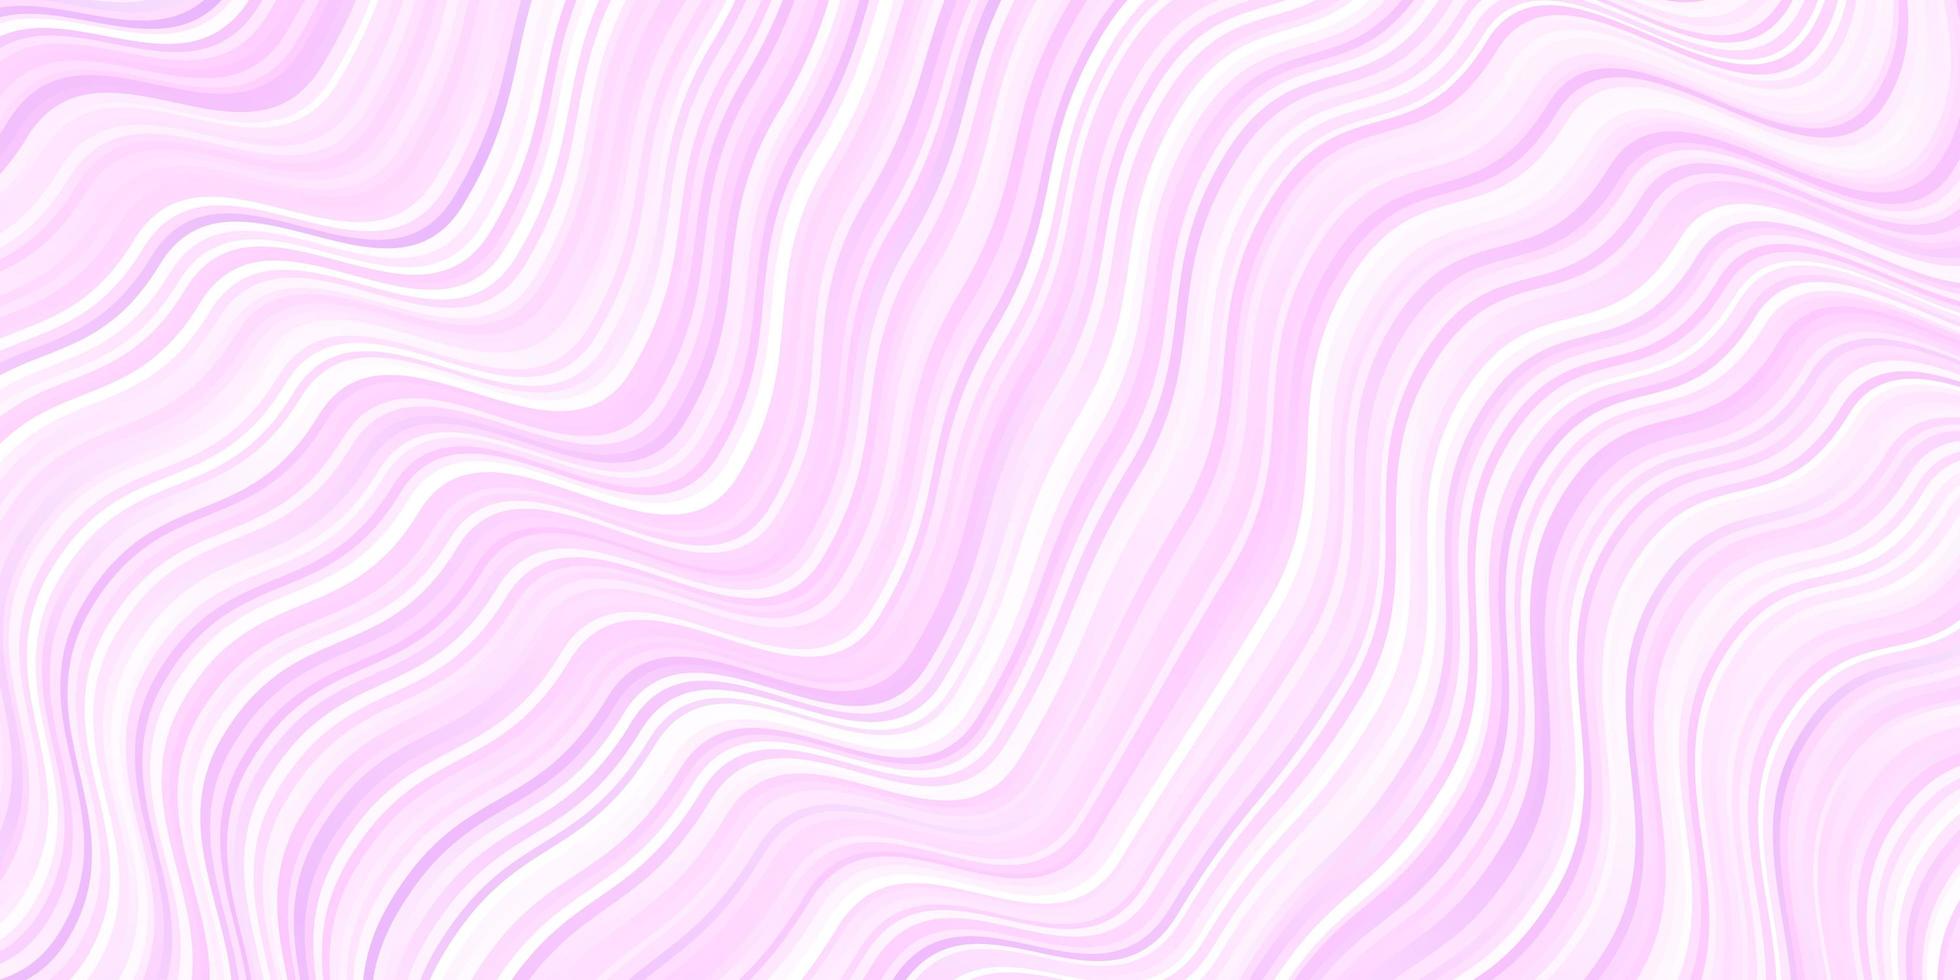 Light Purple vector pattern with lines